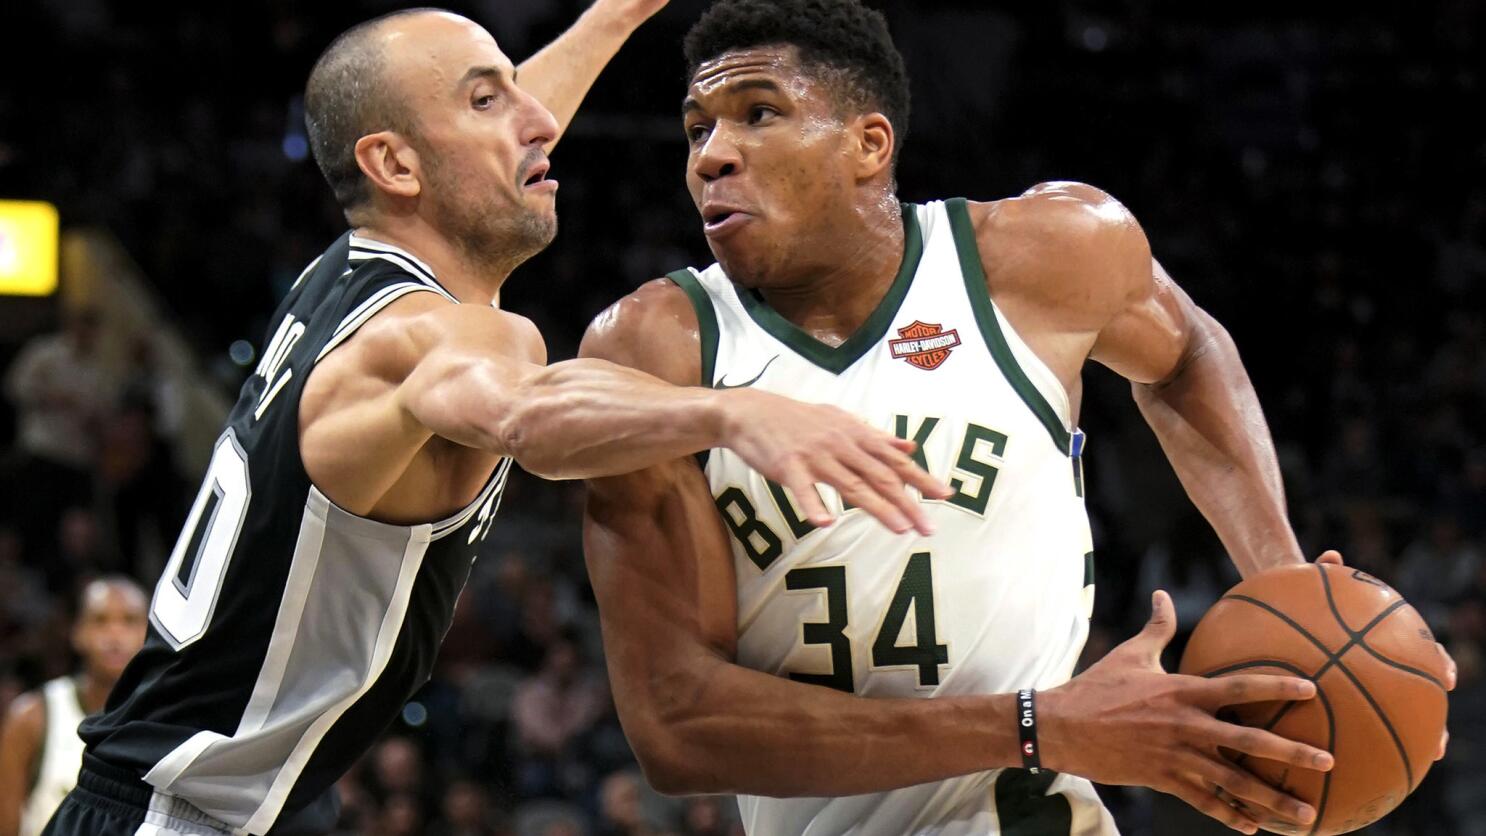 Spurs snap 16-game losing streak with victory over Jazz